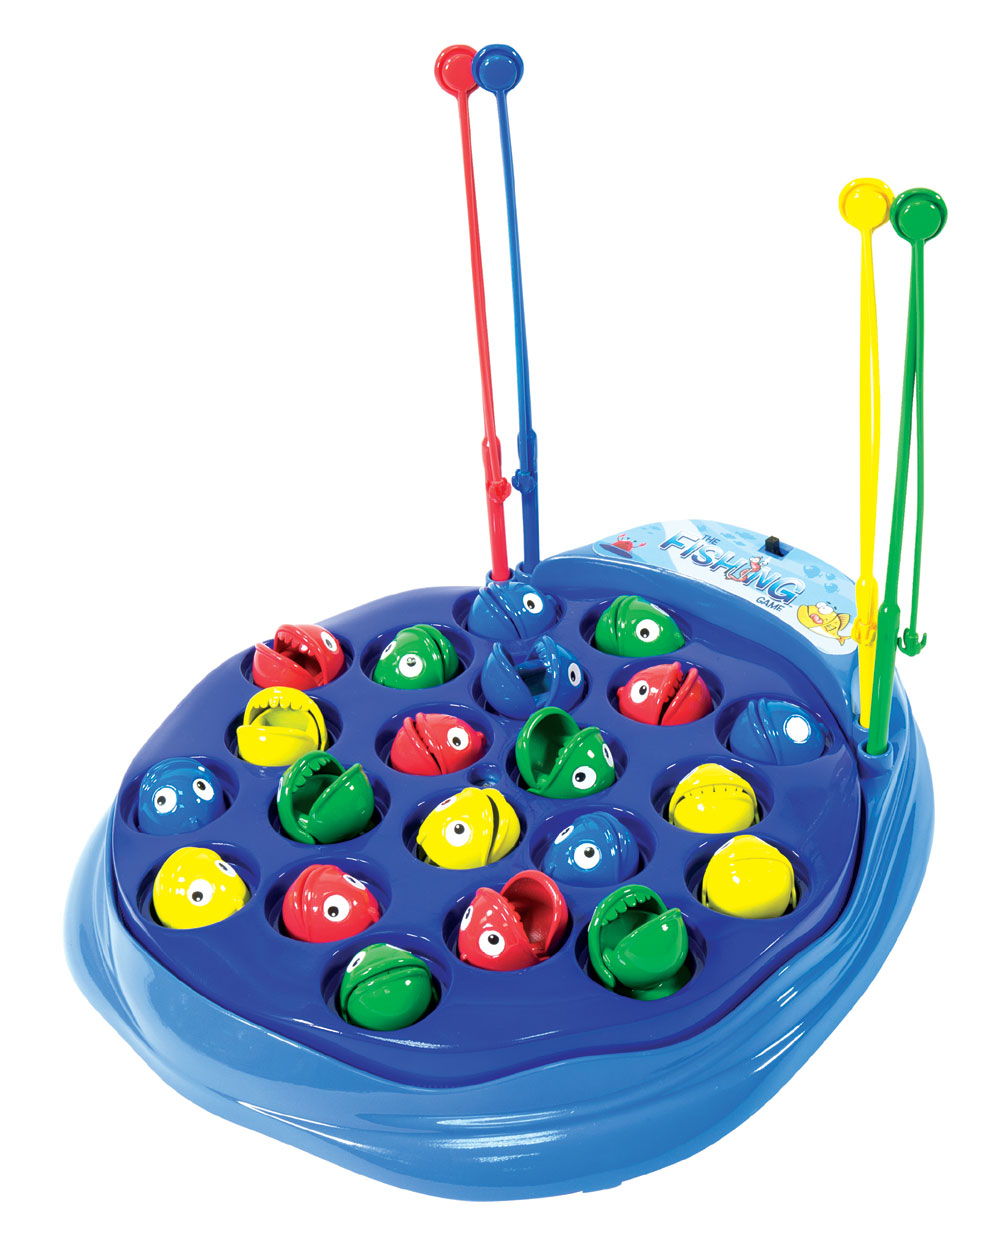 jmv Fish Catching Game Big with 26 Fishes and 4 Pods, Includes